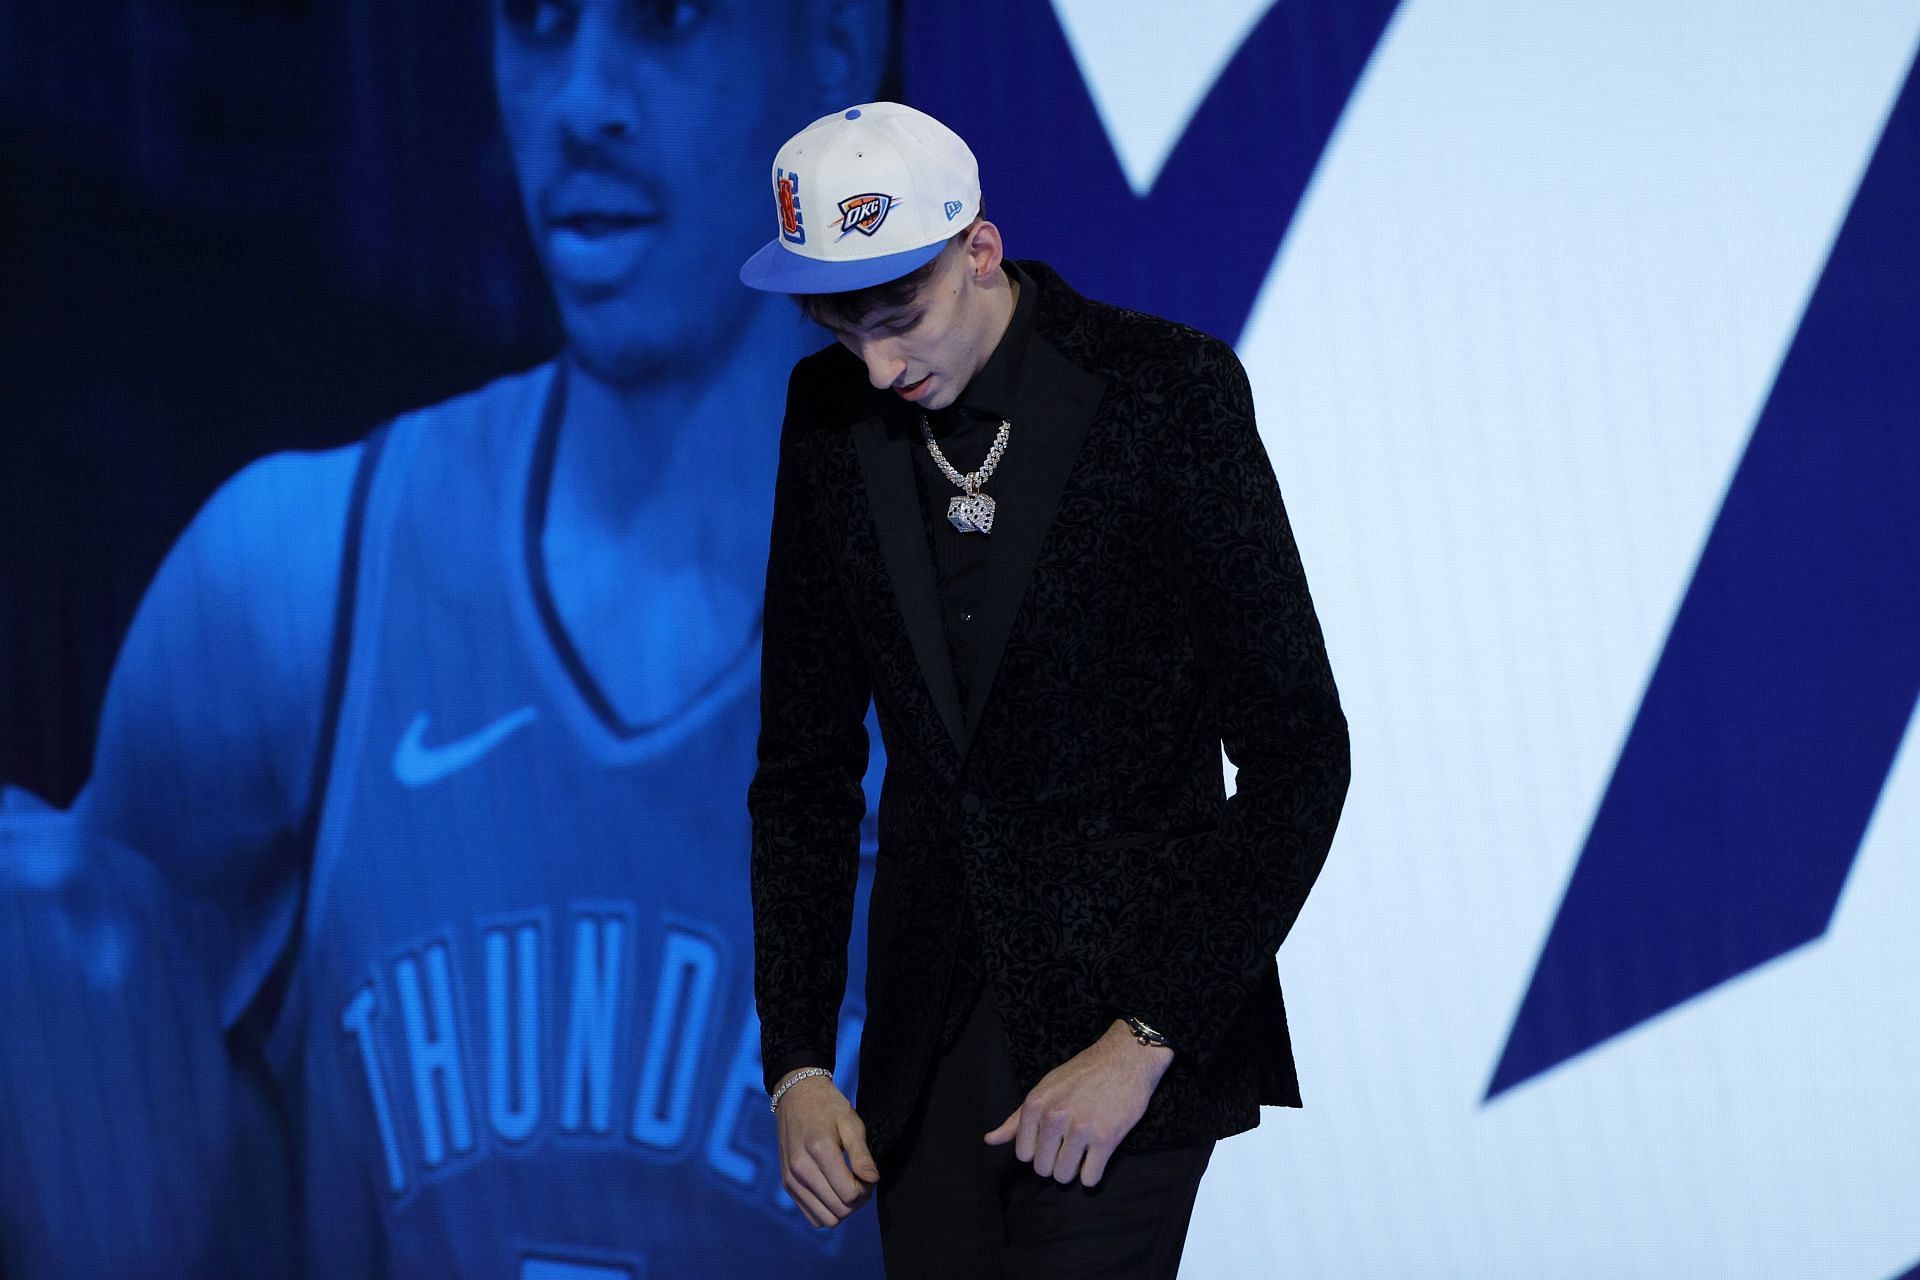 Chet Holmgren after being selected by the OKC Thunder at the 2022 draft